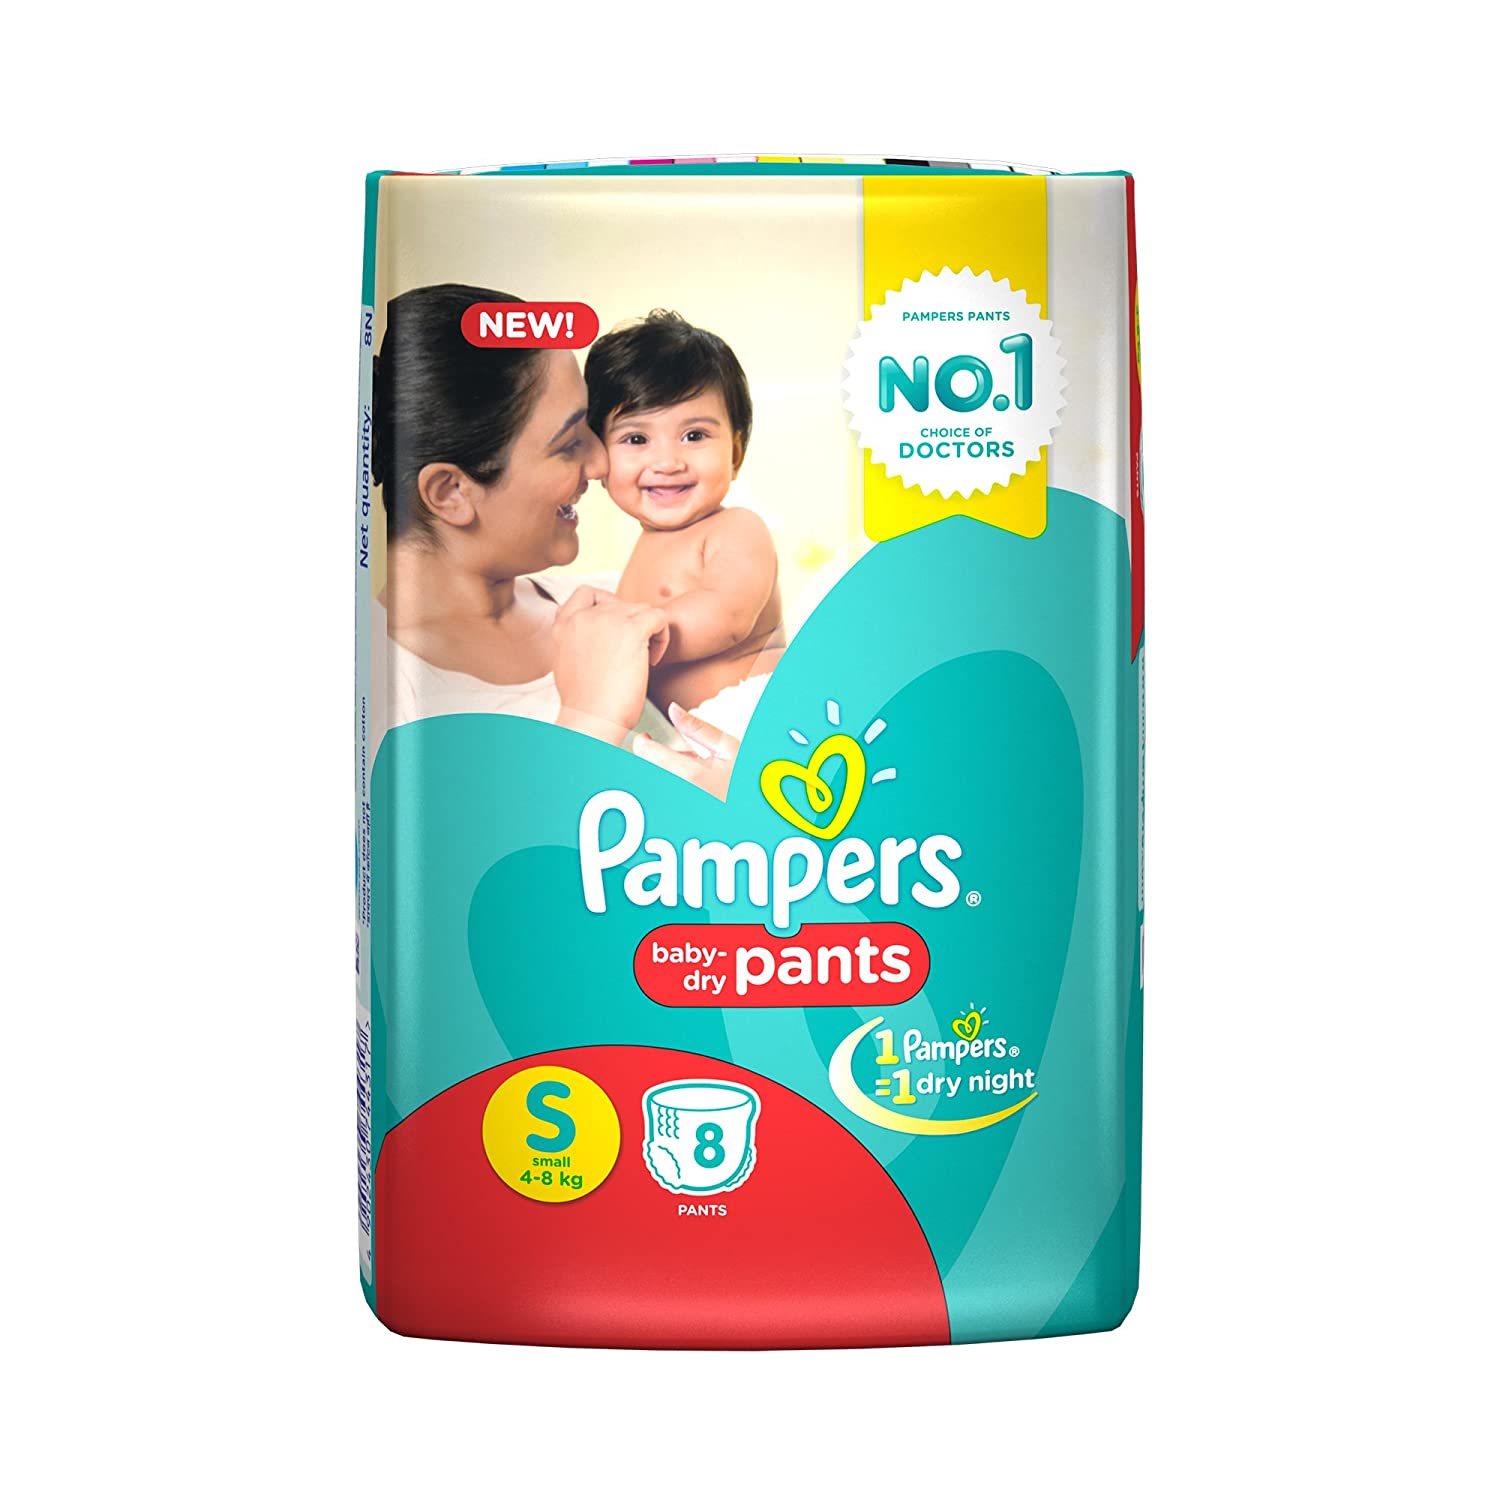 Pampers Pants S (8Pants)